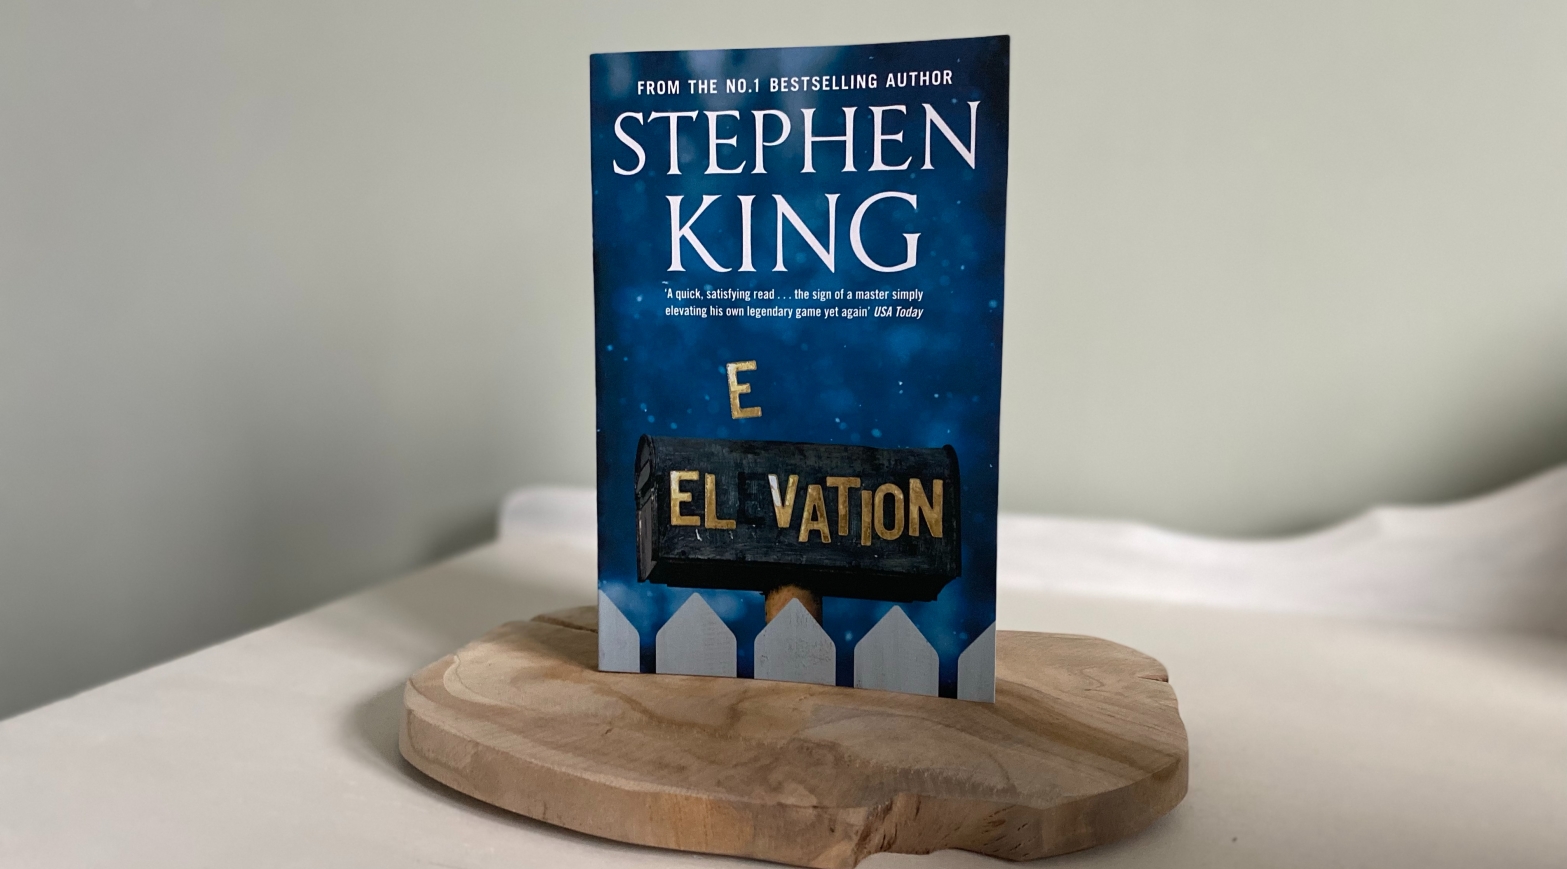 The book Elevation by Stephen King standing on a wooden platform, in front of a green wall.